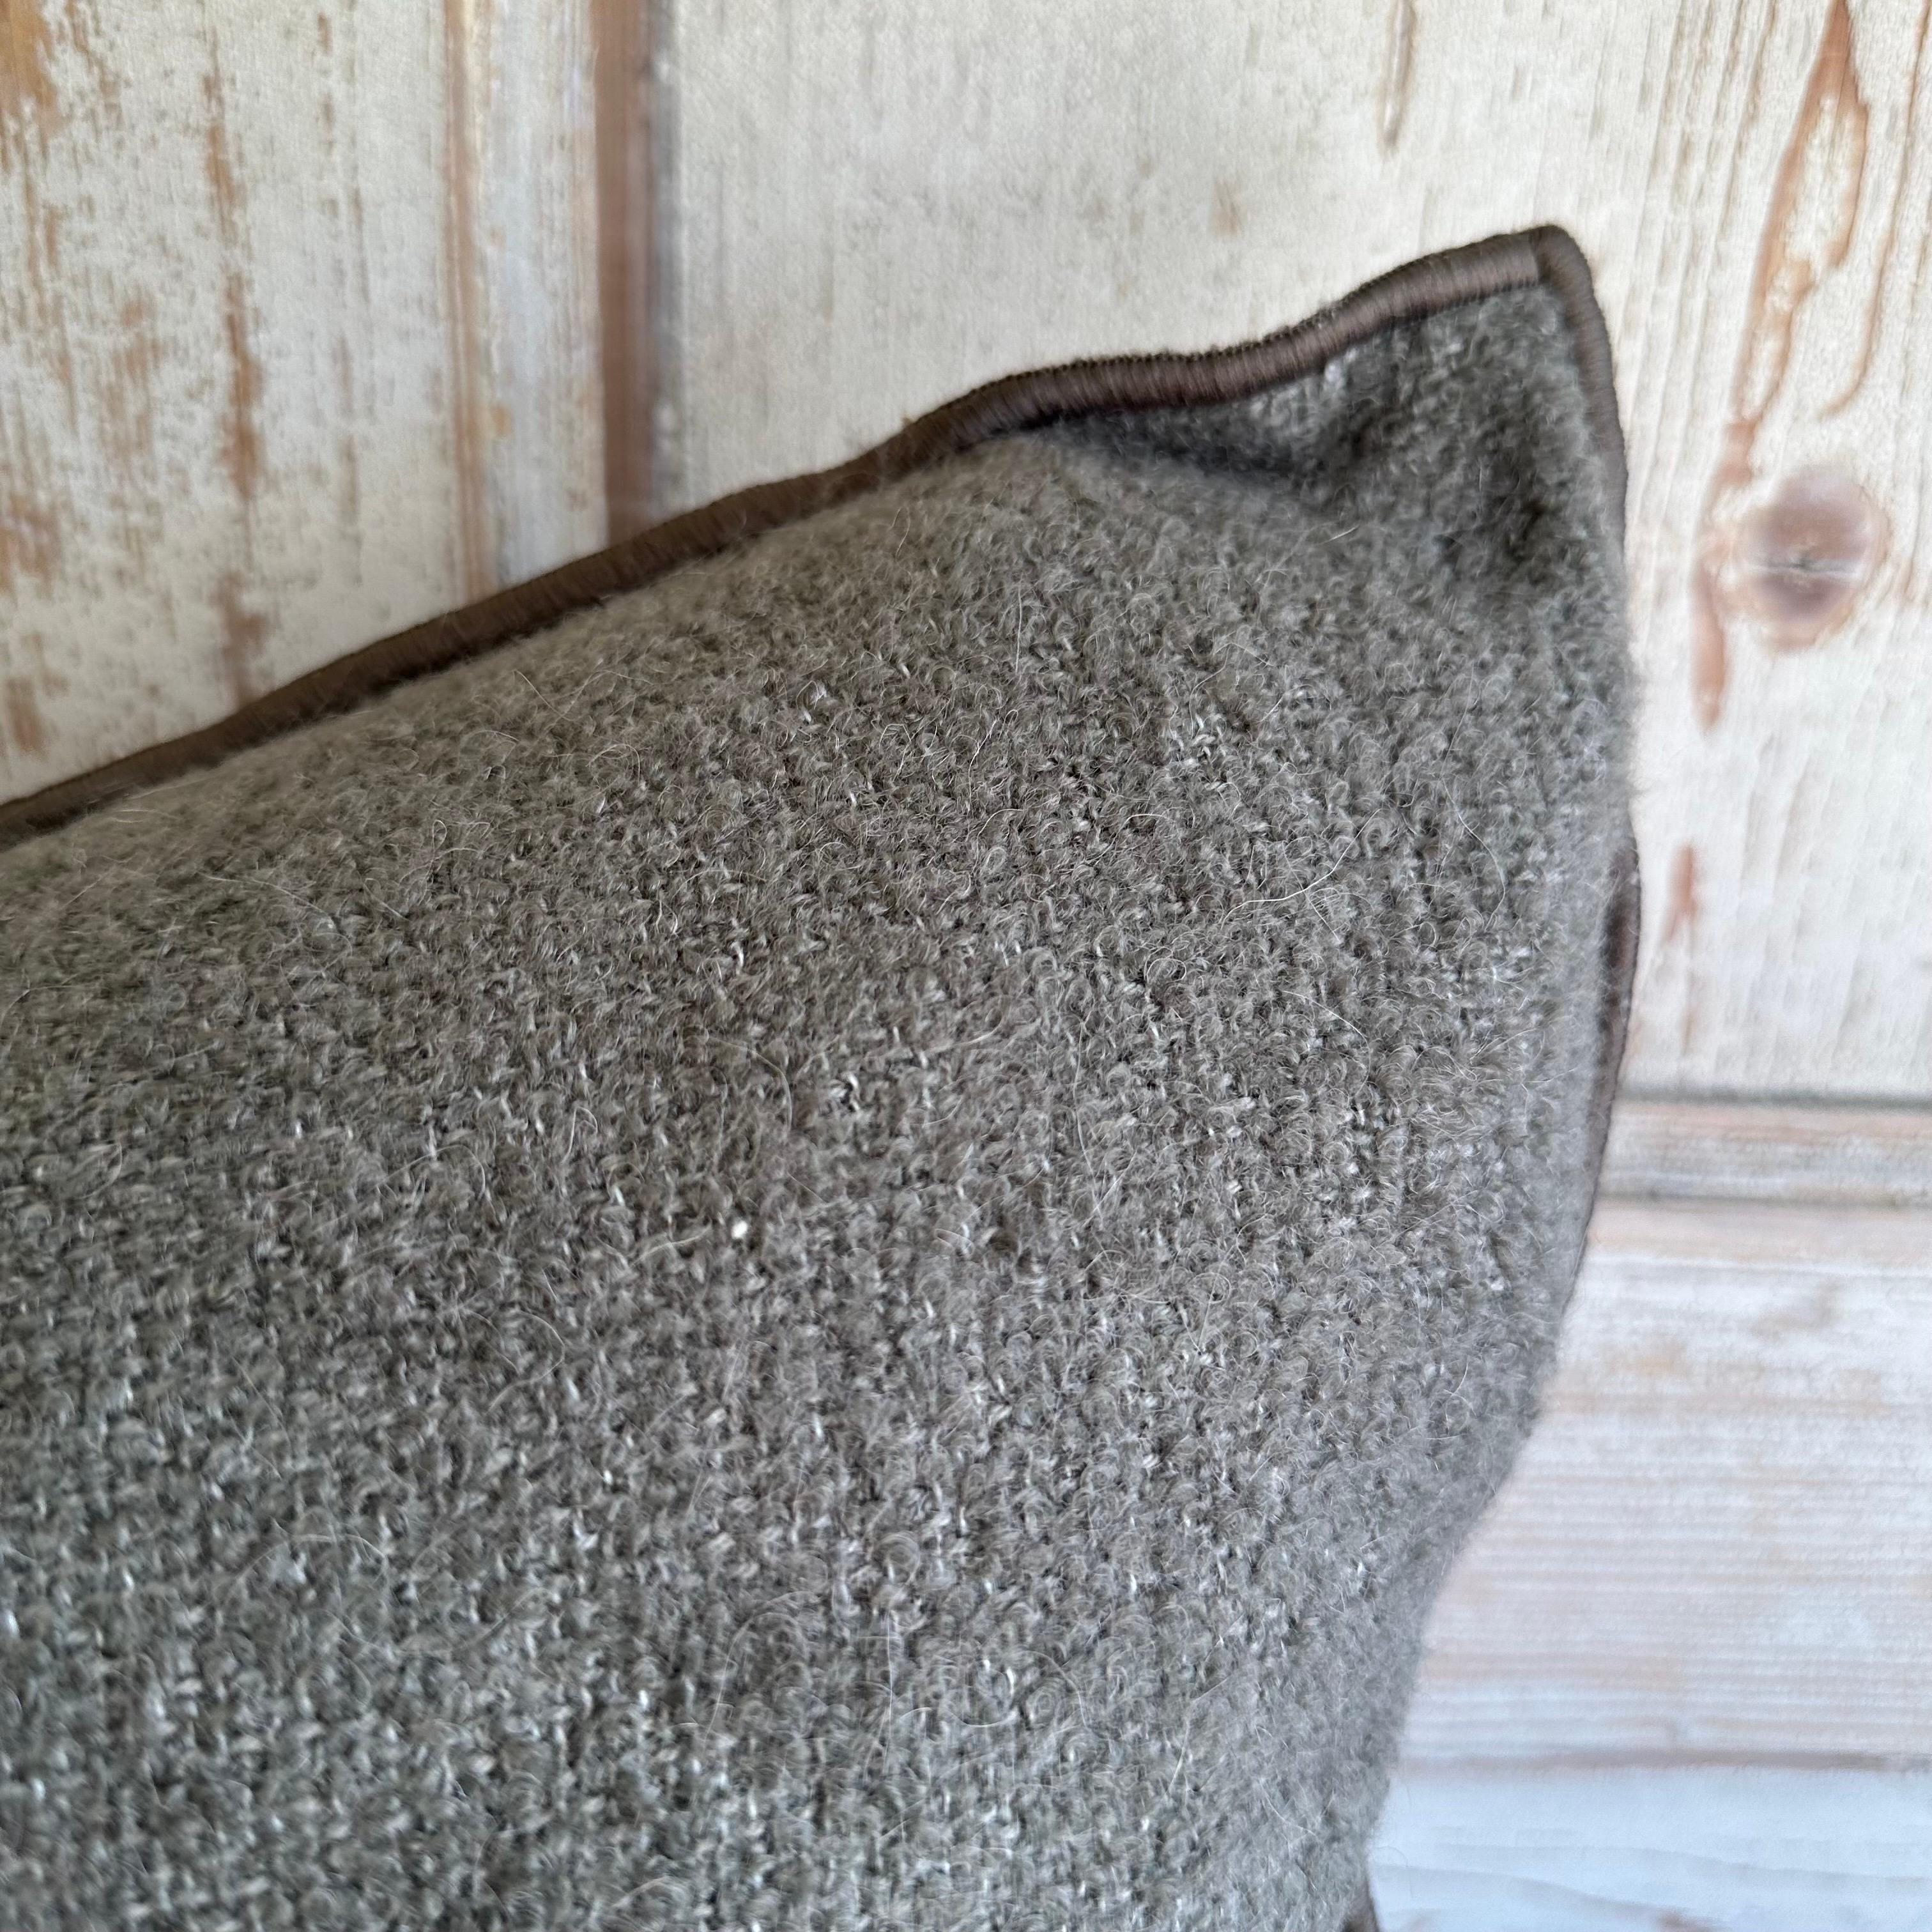 Bouclette French wool accent pillow
Custom wool blend accent pillow with down insert 
Color: ecorce which is a dark elephant gray colored nubby boucle style pillow with a stitched edge, metal zipper closure. 
Size: 14” x 24”
Our pillows are